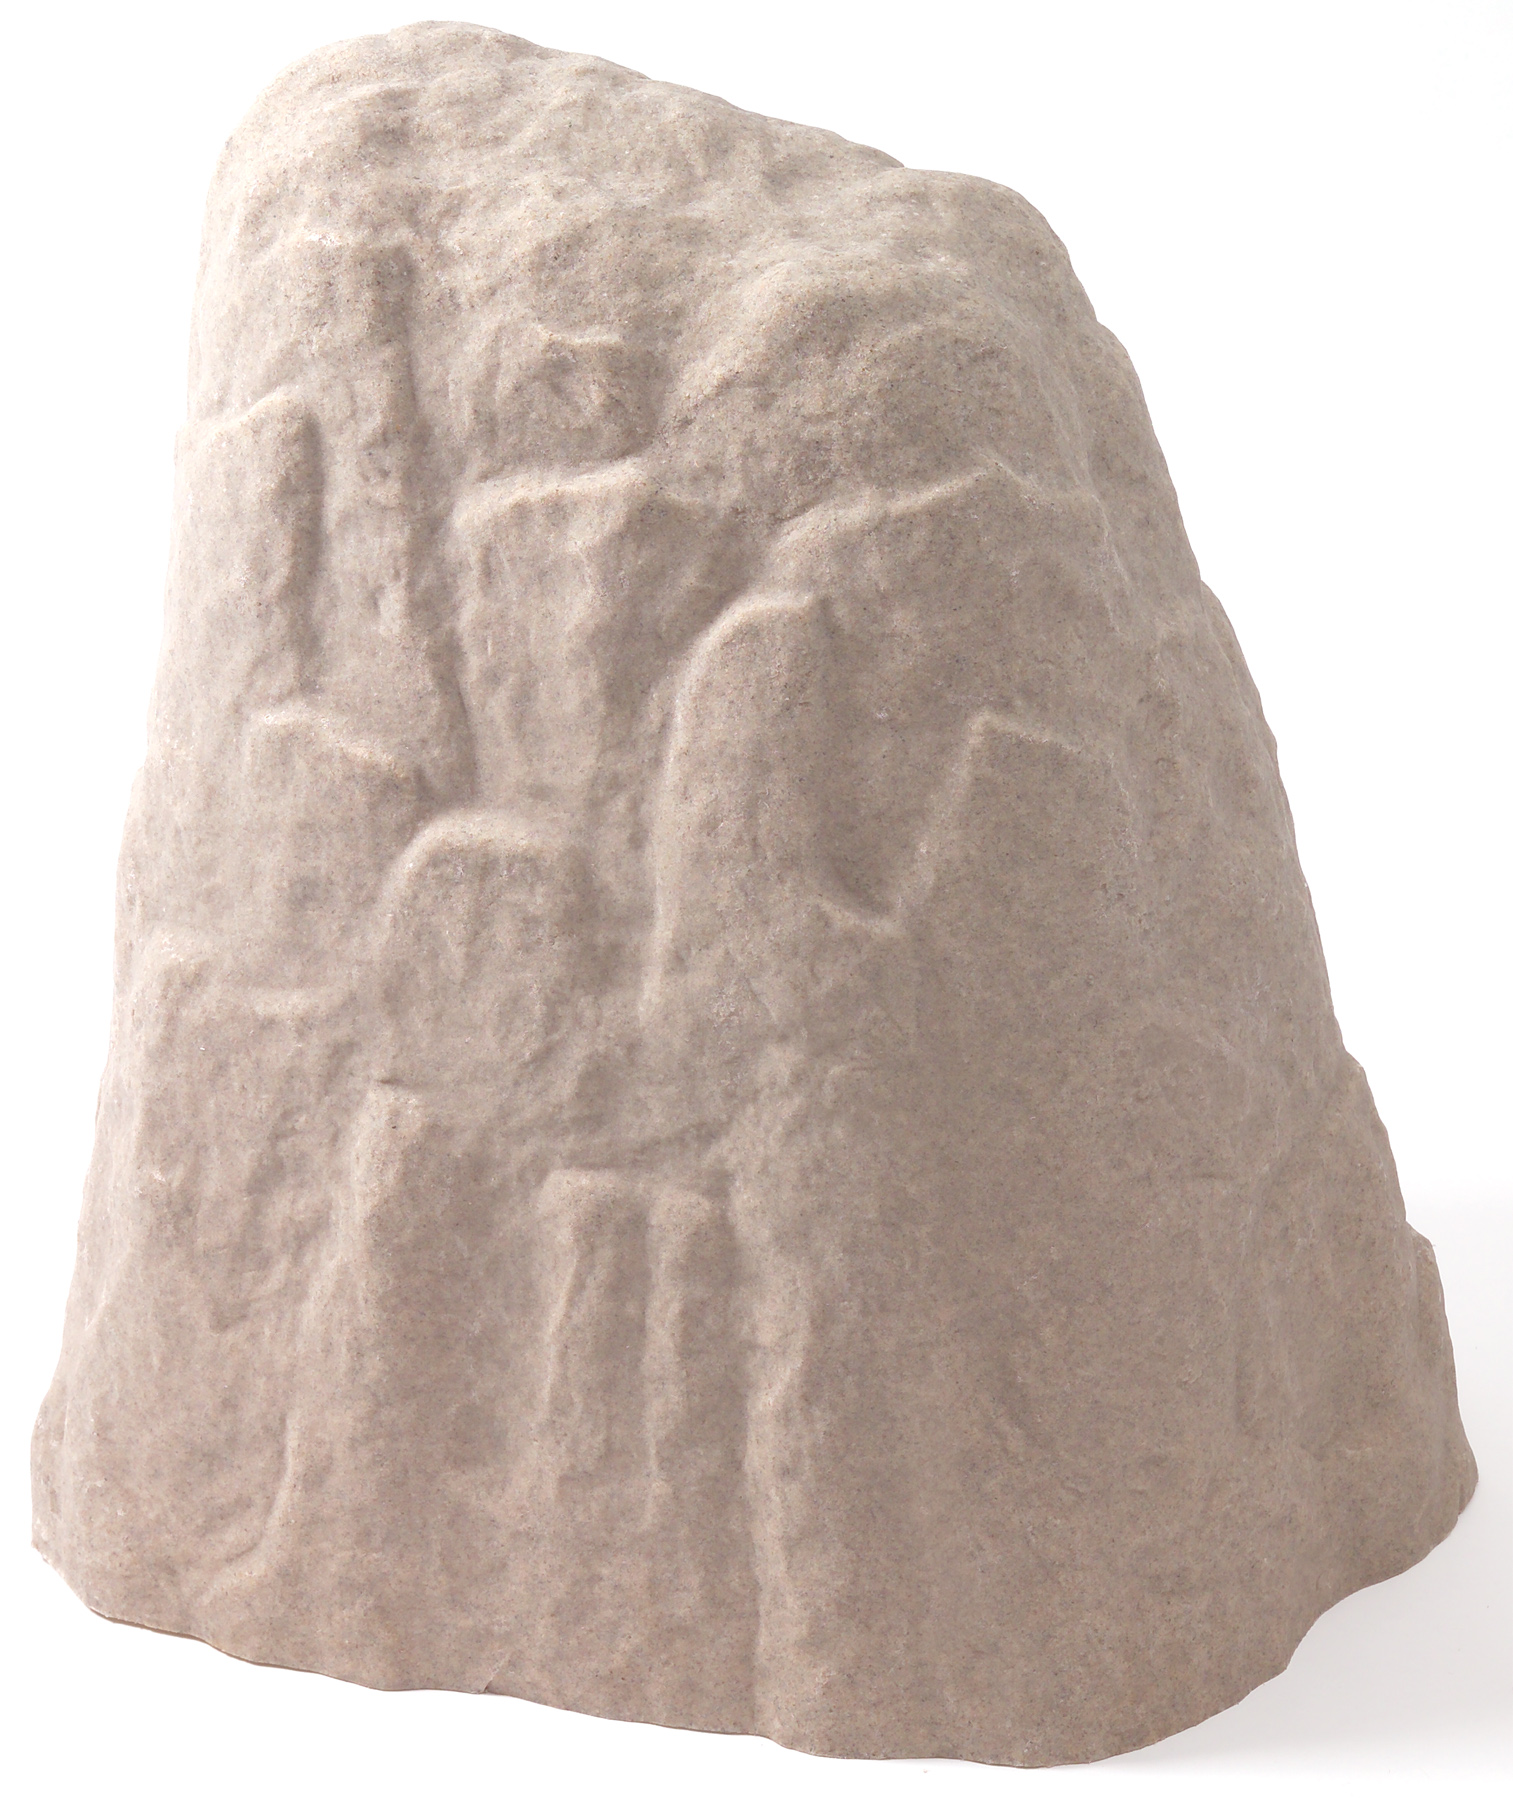 Emsco Group Extra Large Sized  Sand Colored Architectural Rock